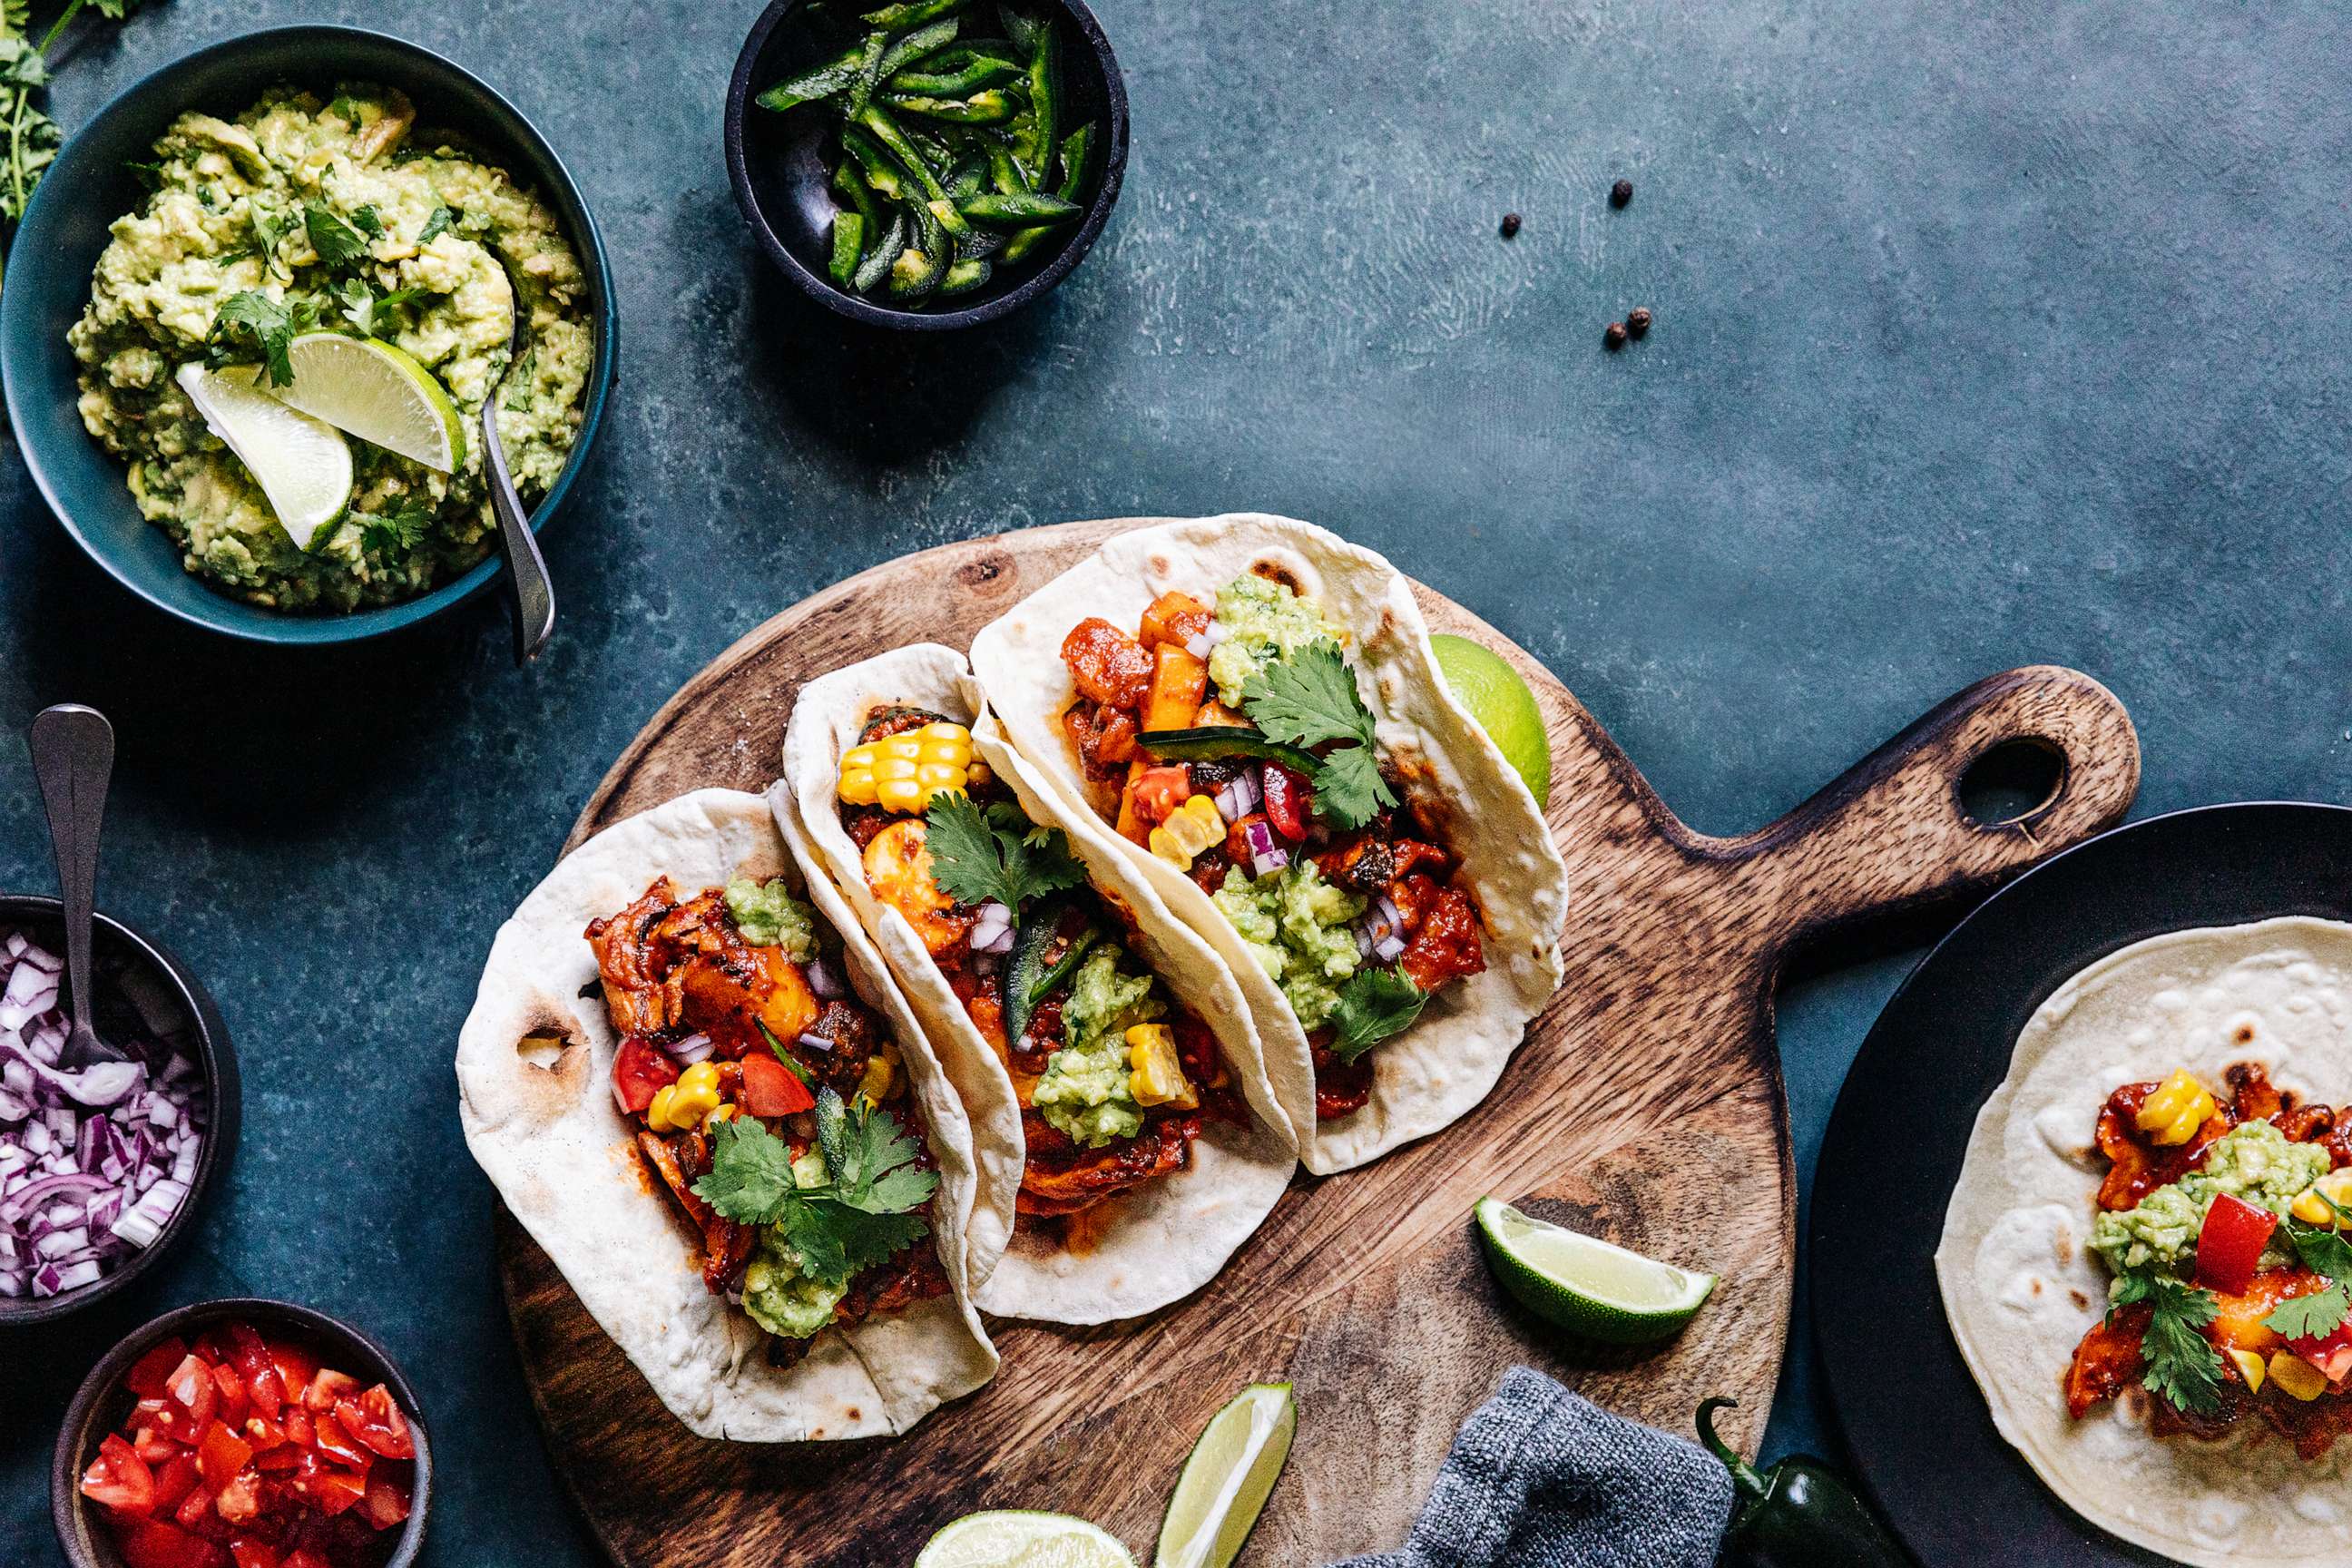 PHOTO: In an undated stock photo, three tacos are seen on a wooden board.